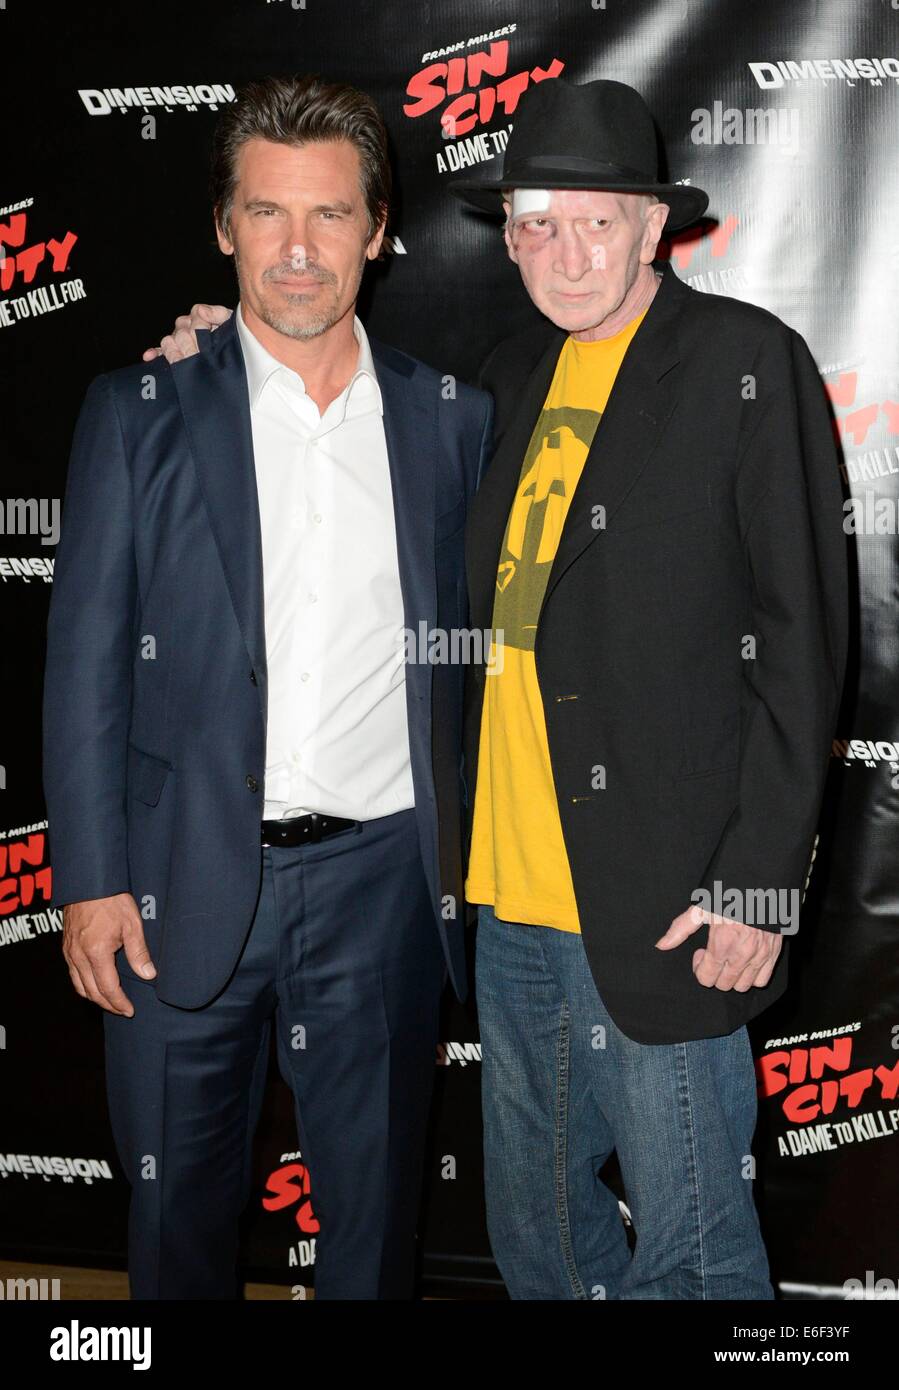 New York, NY, USA. 21st Aug, 2014. Josh Brolin, Frank Miller in attendance for SIN CITY: A DAME TO KILL FOR Photo Opportunity, Crosby Street Hotel, New York, NY August 21, 2014. © Derek Storm/Everett Collection/Alamy Live News Stock Photo